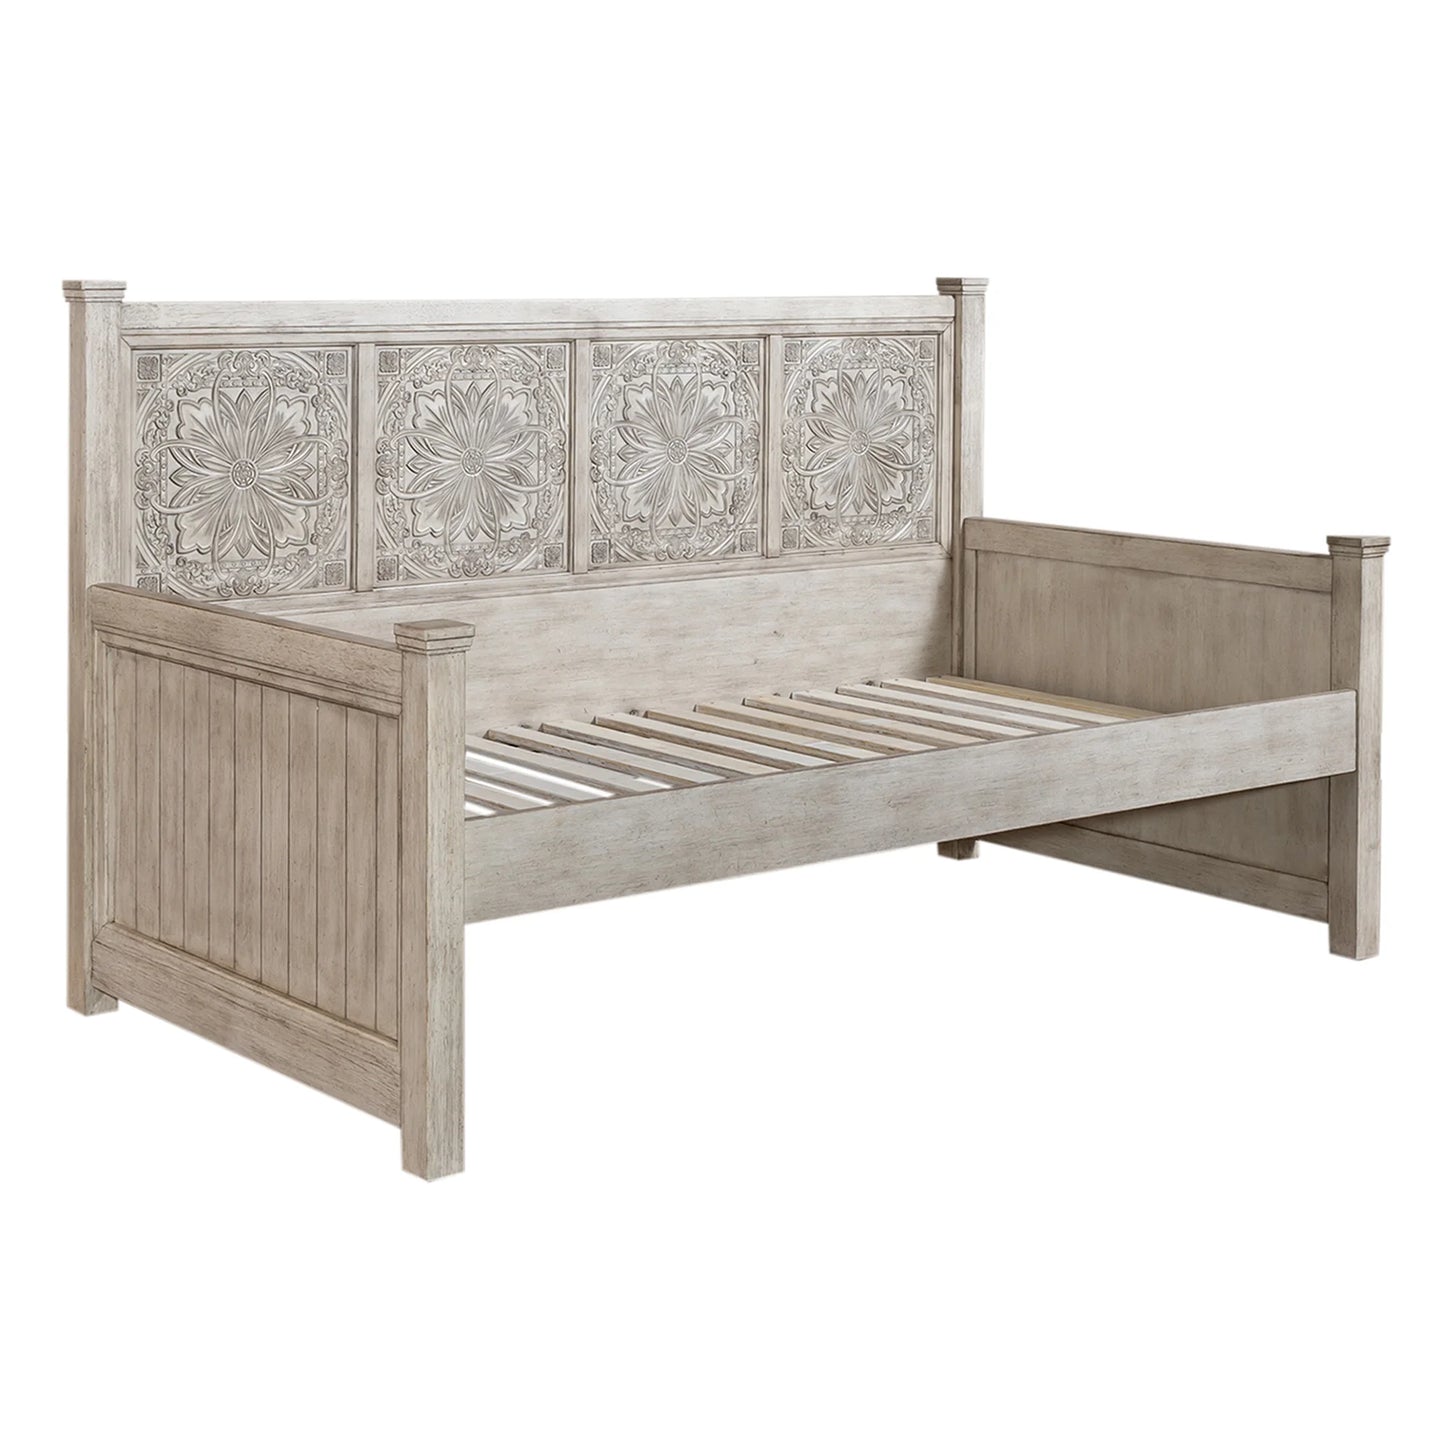 Heartland - Daybed Decorative Back - White 1